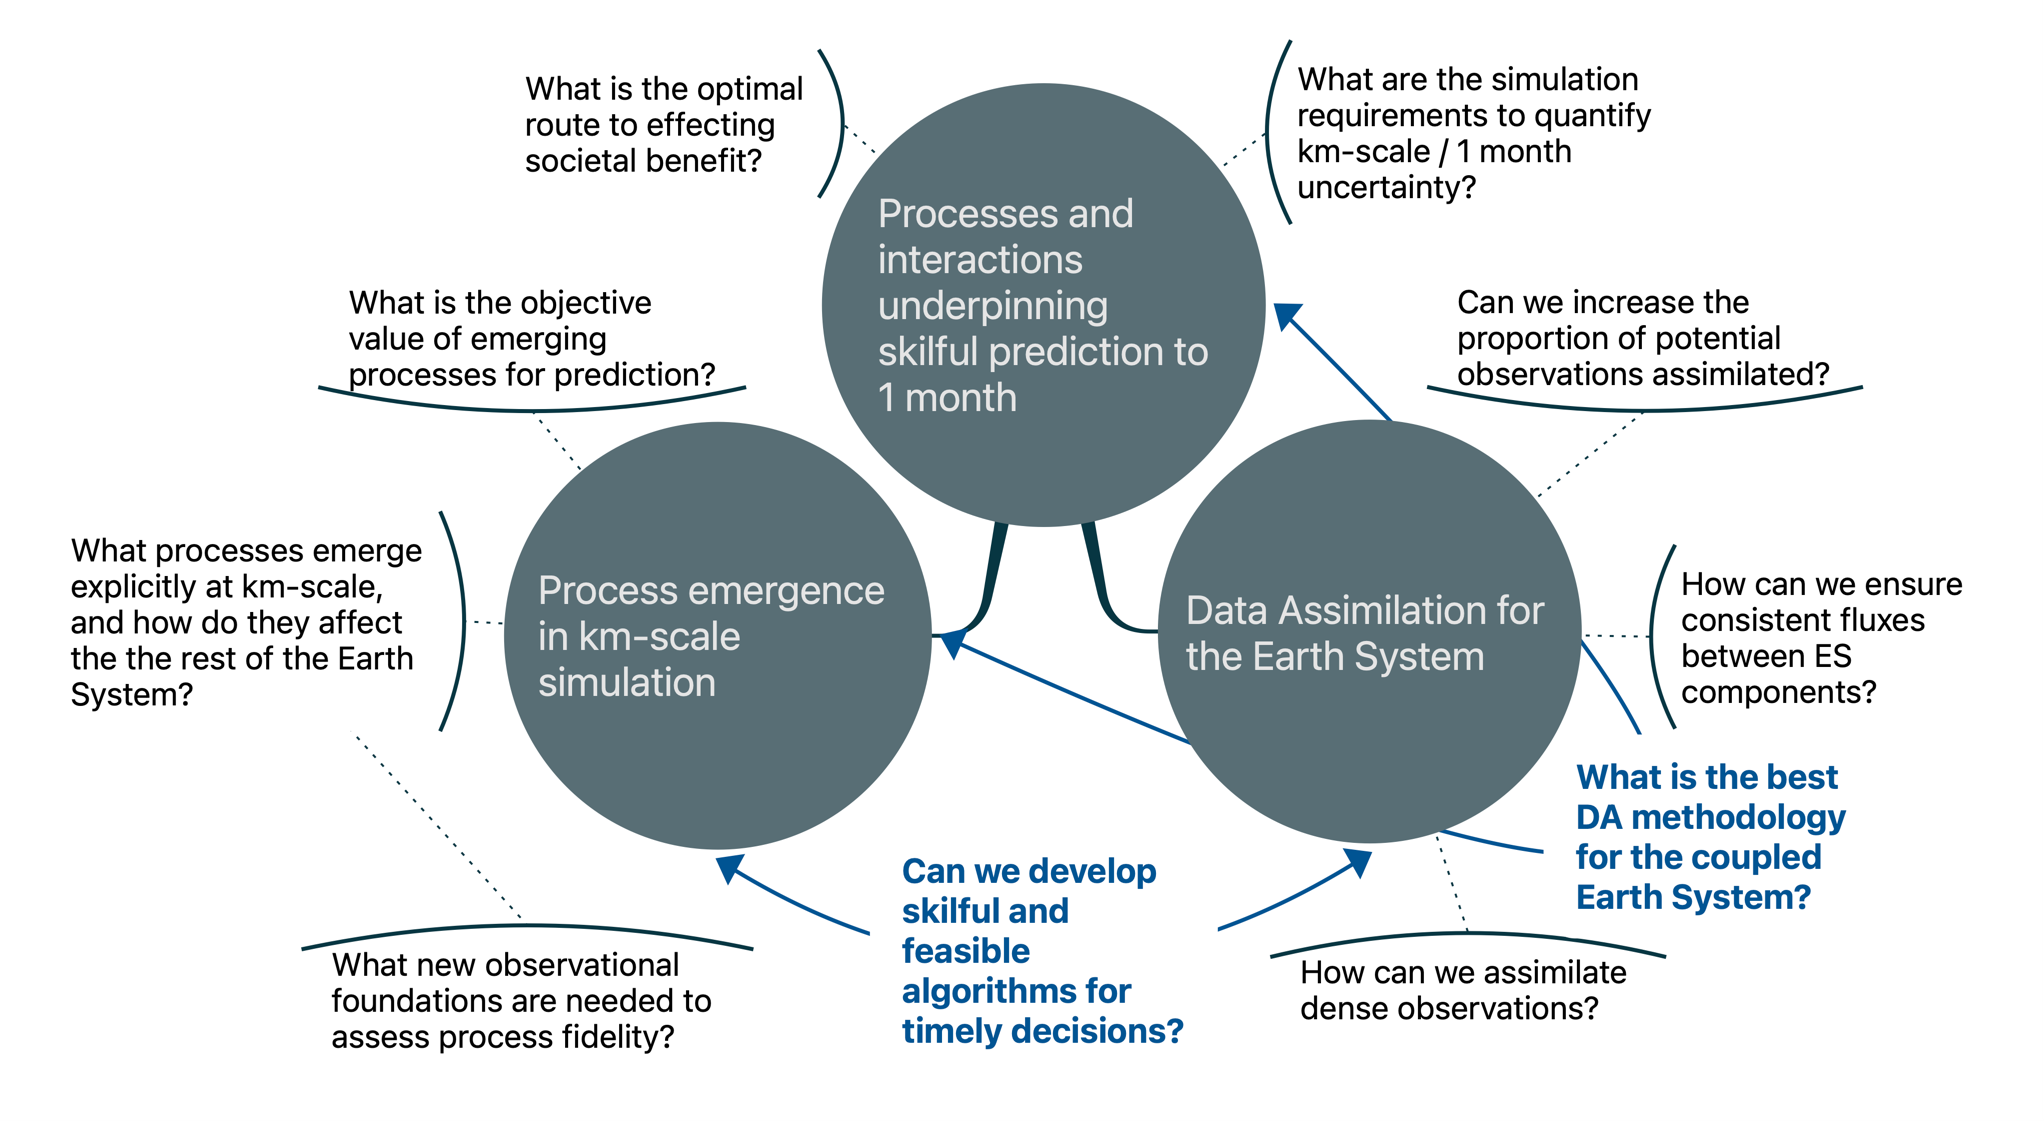 a mind map showing how basic process and system understanding, focussed on phenomena that emerge at a resolution of ~1km, and on signals that can be leveraged by new approaches in data assimilation, can unleash the underexplored predictability existing in the Earth System.